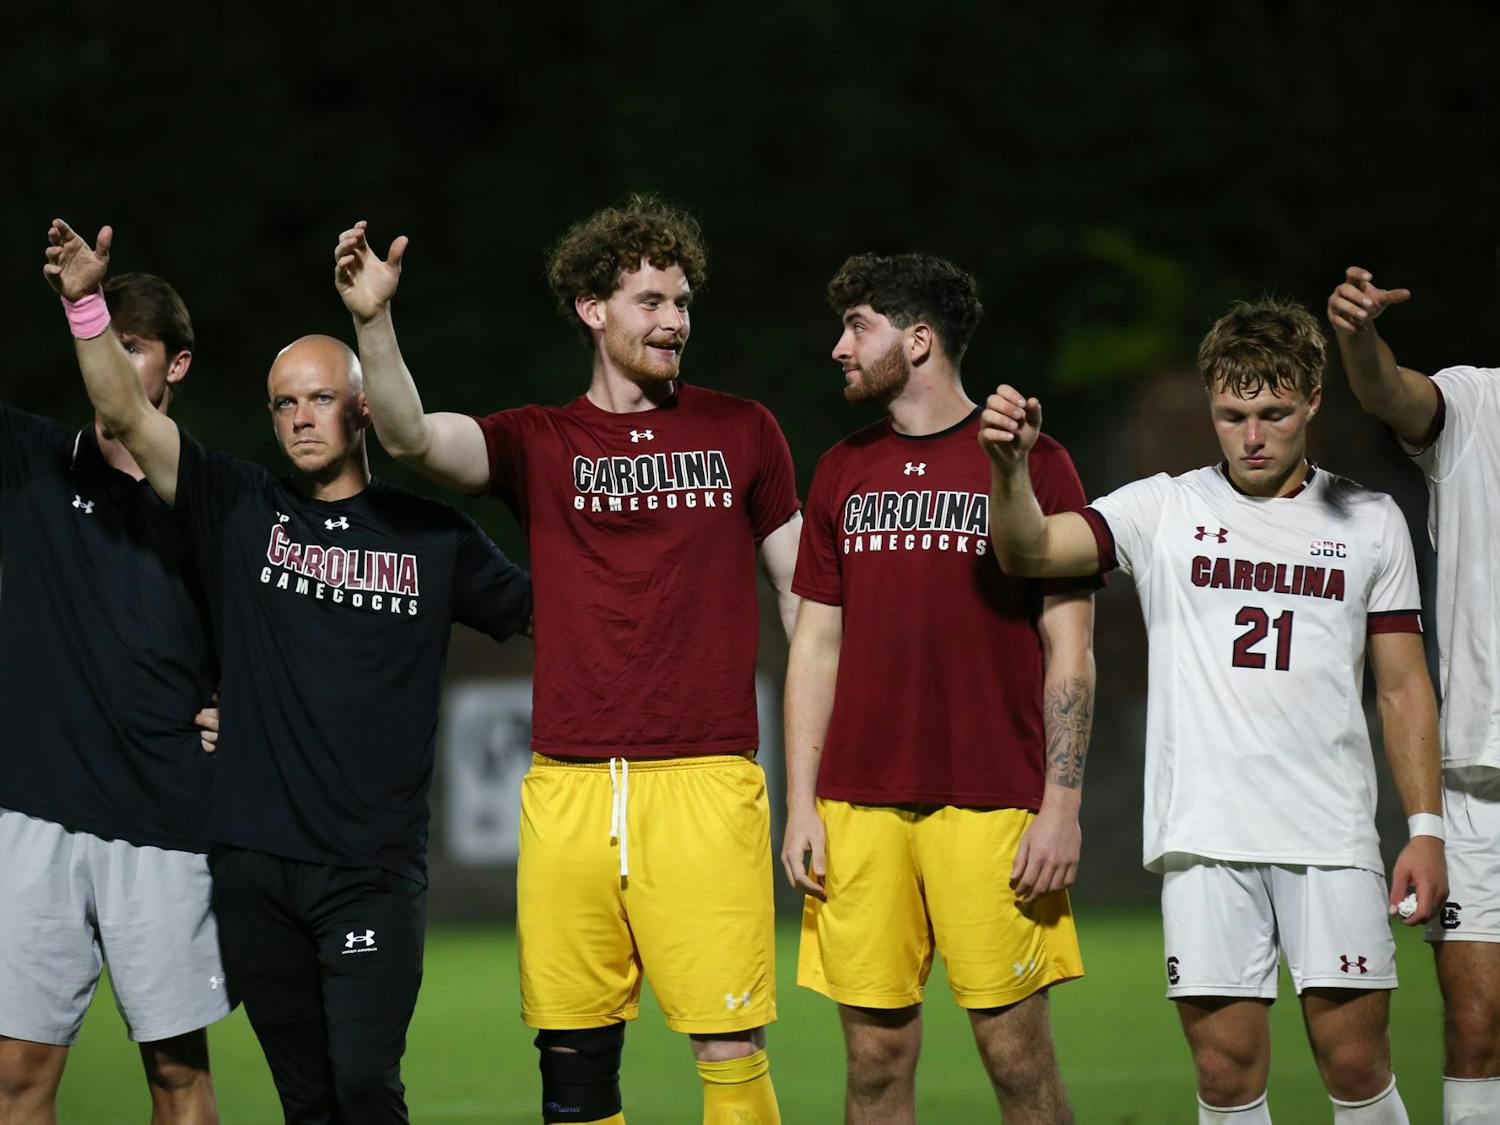 Redshirt senior goalkeeper Brant Zulauf and redshirt freshman goalkeeper Matt Bender sing the alma mater with their teammates after the team's game against Jacksonville University on Oct. 3, 2023. The Gamecocks defeated the Dolphins 1-0.&nbsp;